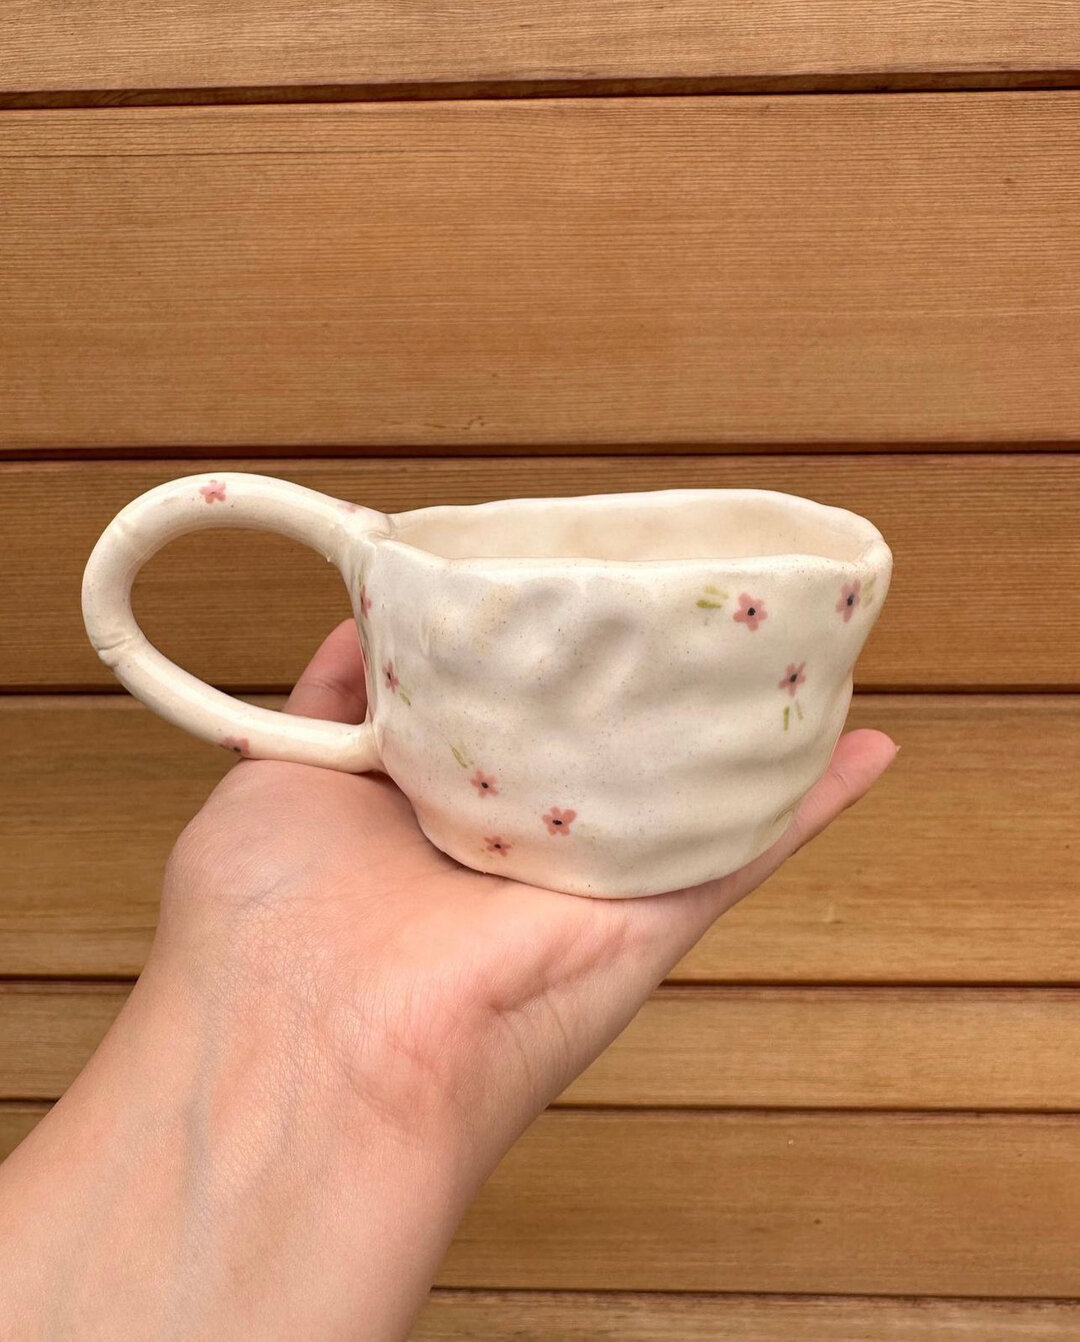 New Vendor Alert 🚨 Let's give a warm welcome to @sundaymornings.ceramic to our MMM community.  A small batch ceramics handmade and free hand painted based in Santa Barbara.  Find Carolina's unique ceramic collection at our upcoming market on June 4t